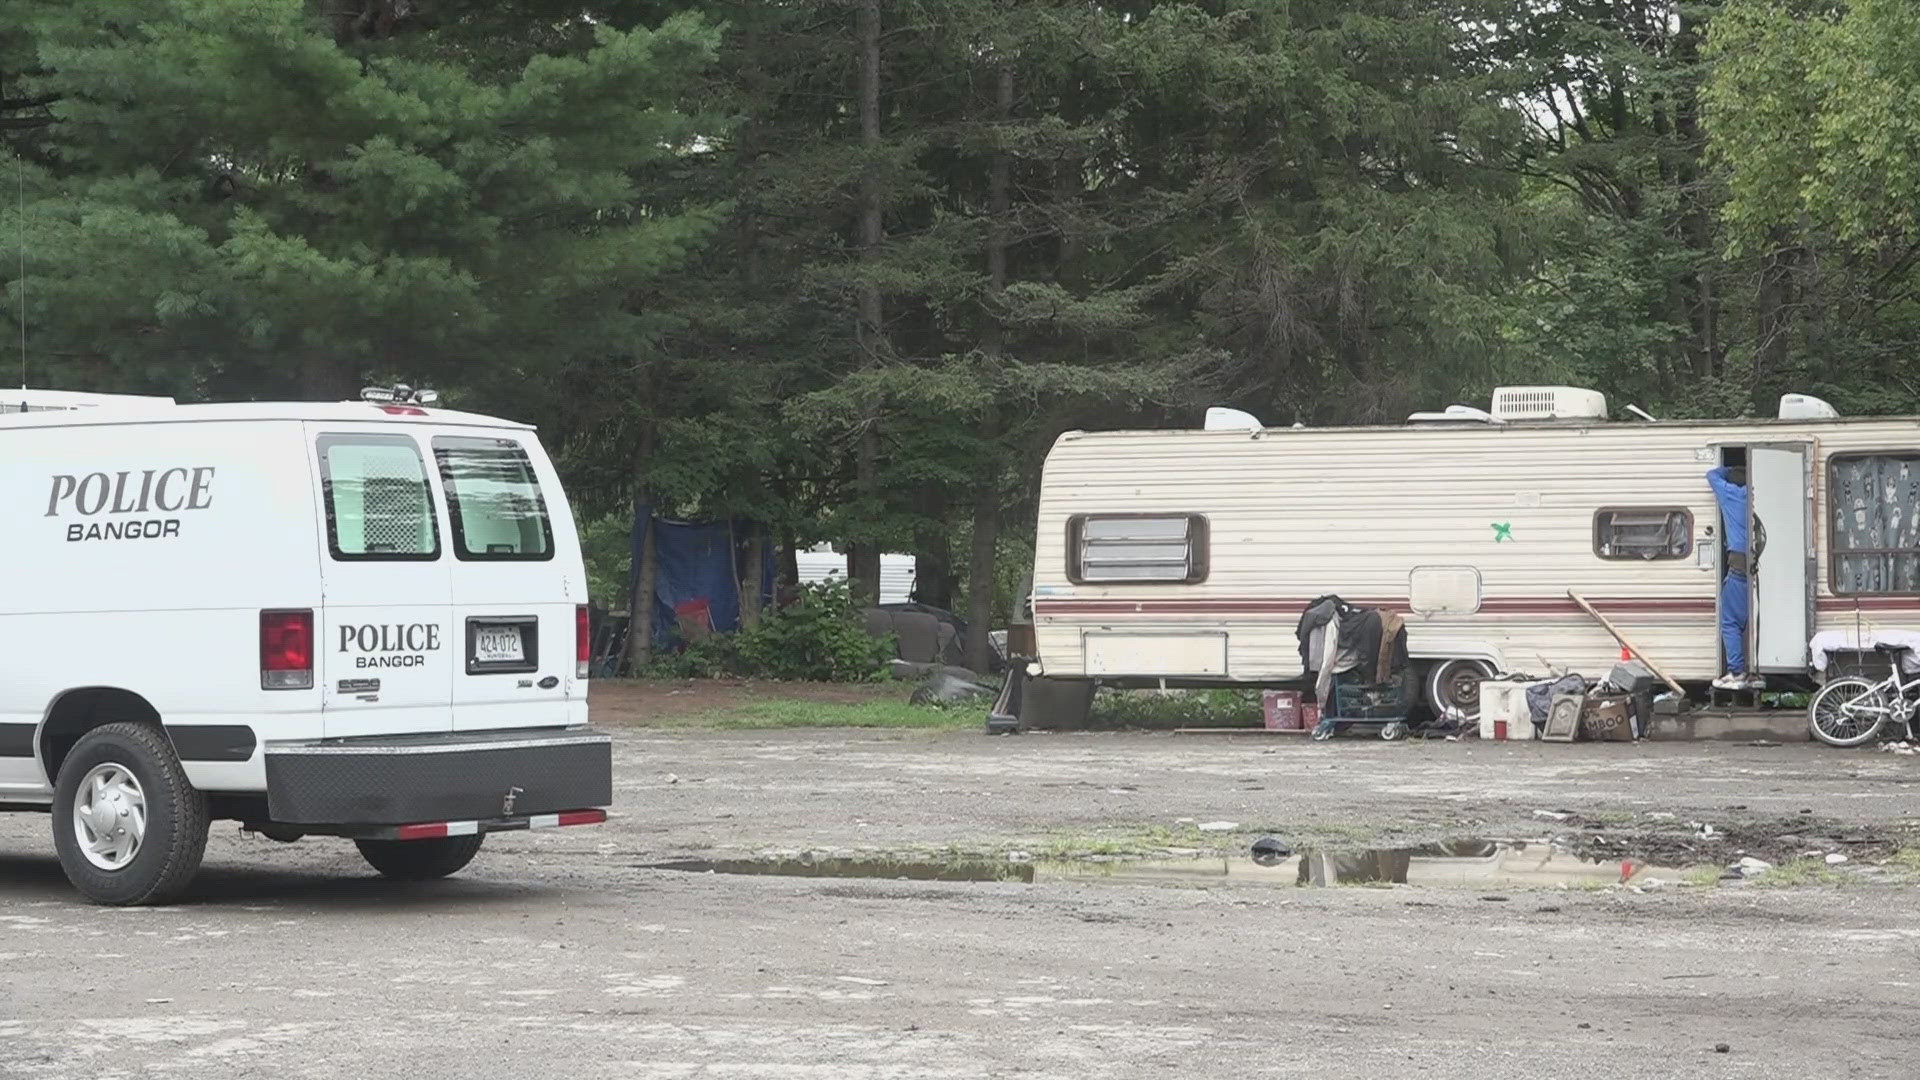 Police carried out a search warrant of an RV parked at the homeless encampment known as Camp Hope on Thursday, which led to the arrest of two individuals.